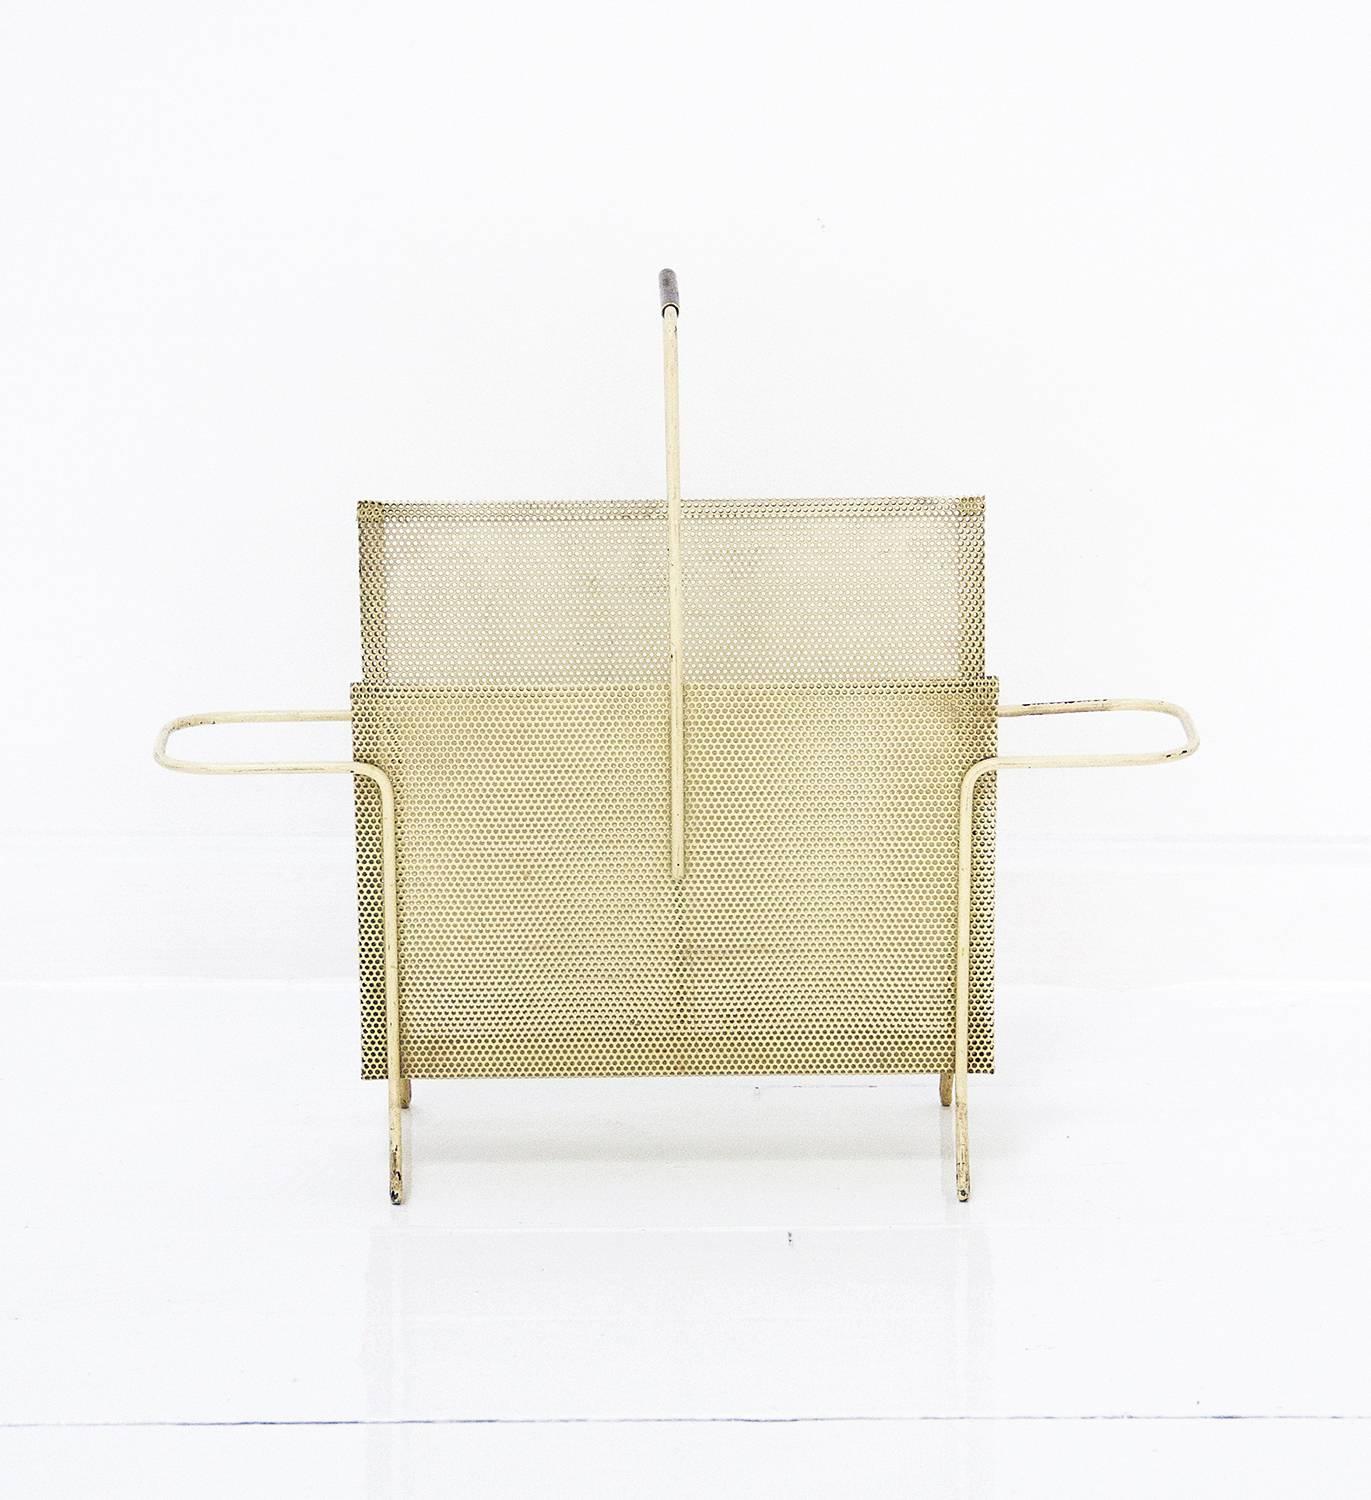 Magazine holder designed by Mathieu Matégot and manufactured by Ateliers Matégot in France. It is made of perforated folded metal in a very good original condition and preservating original patina,
circa 1950, France.

                